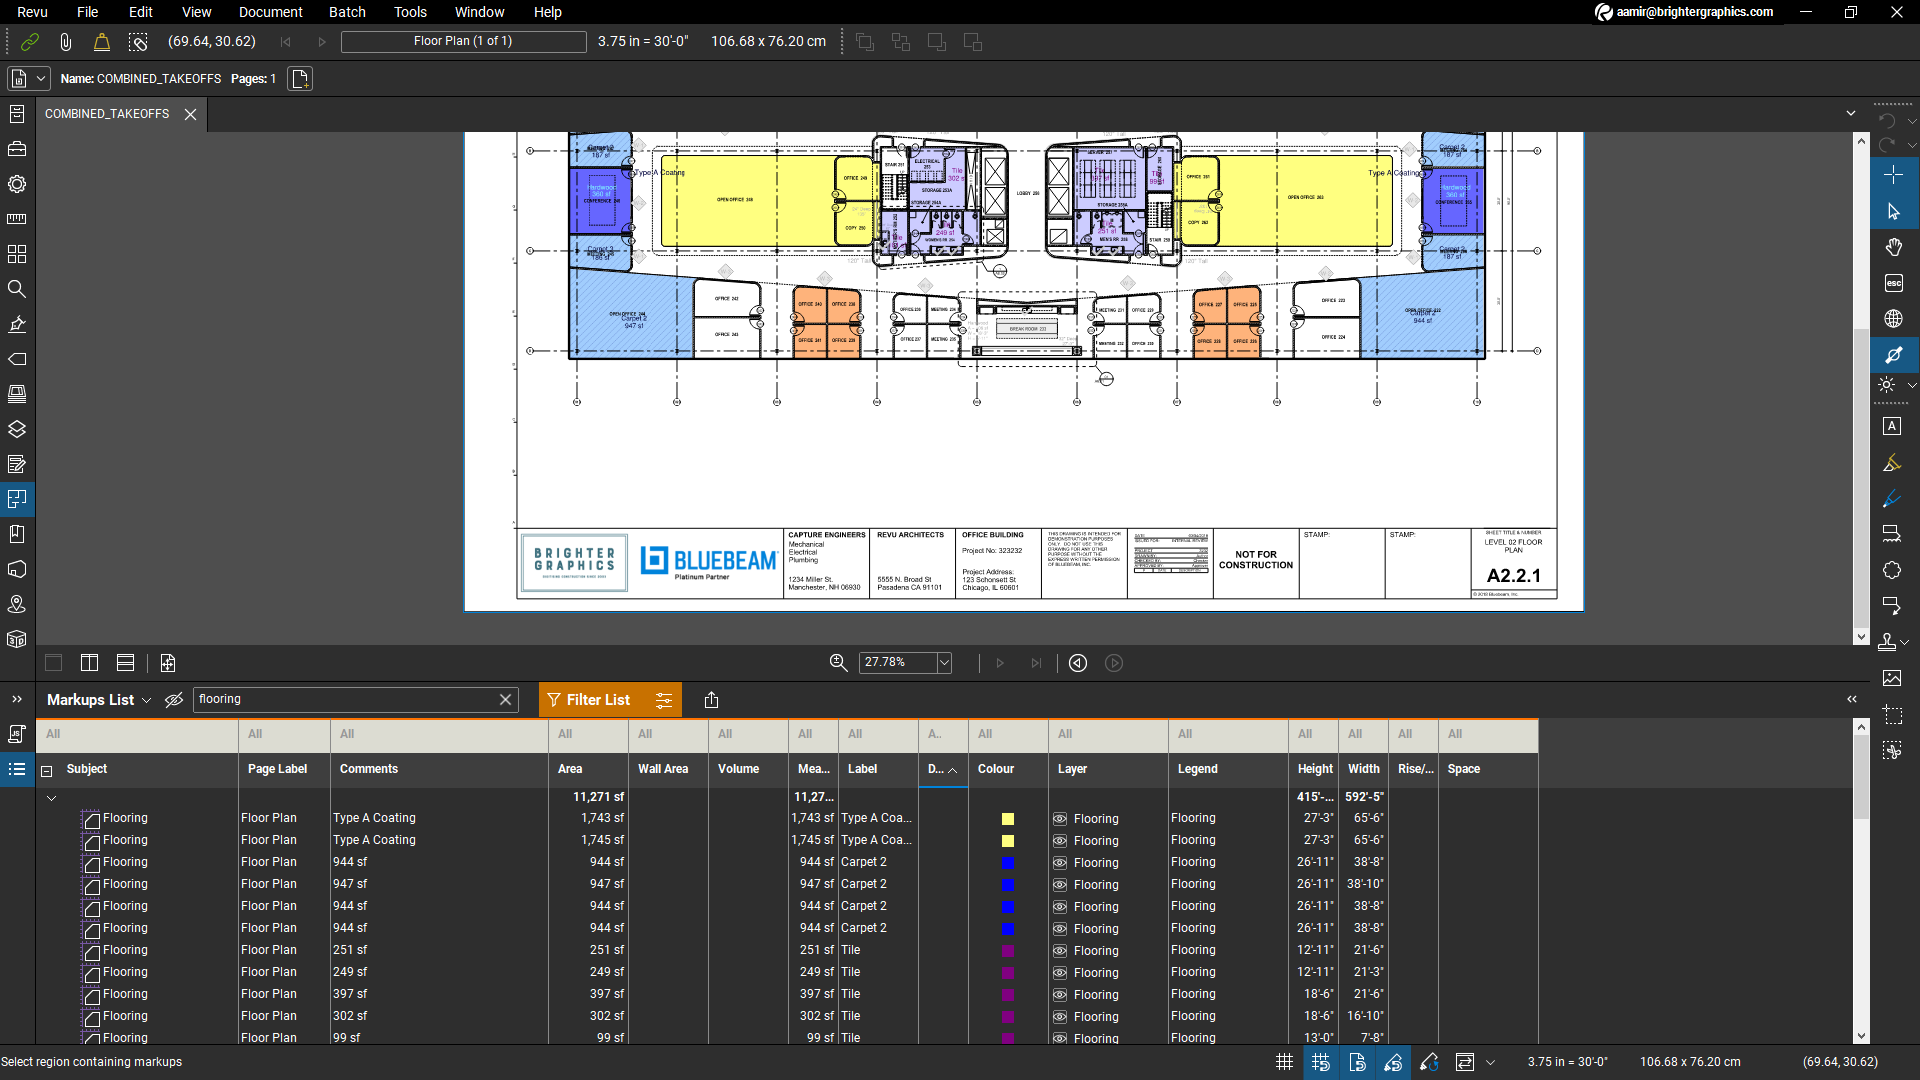 Discover how Bluebeam Redefines AEC Workflows, Brighter Graphics Ltd